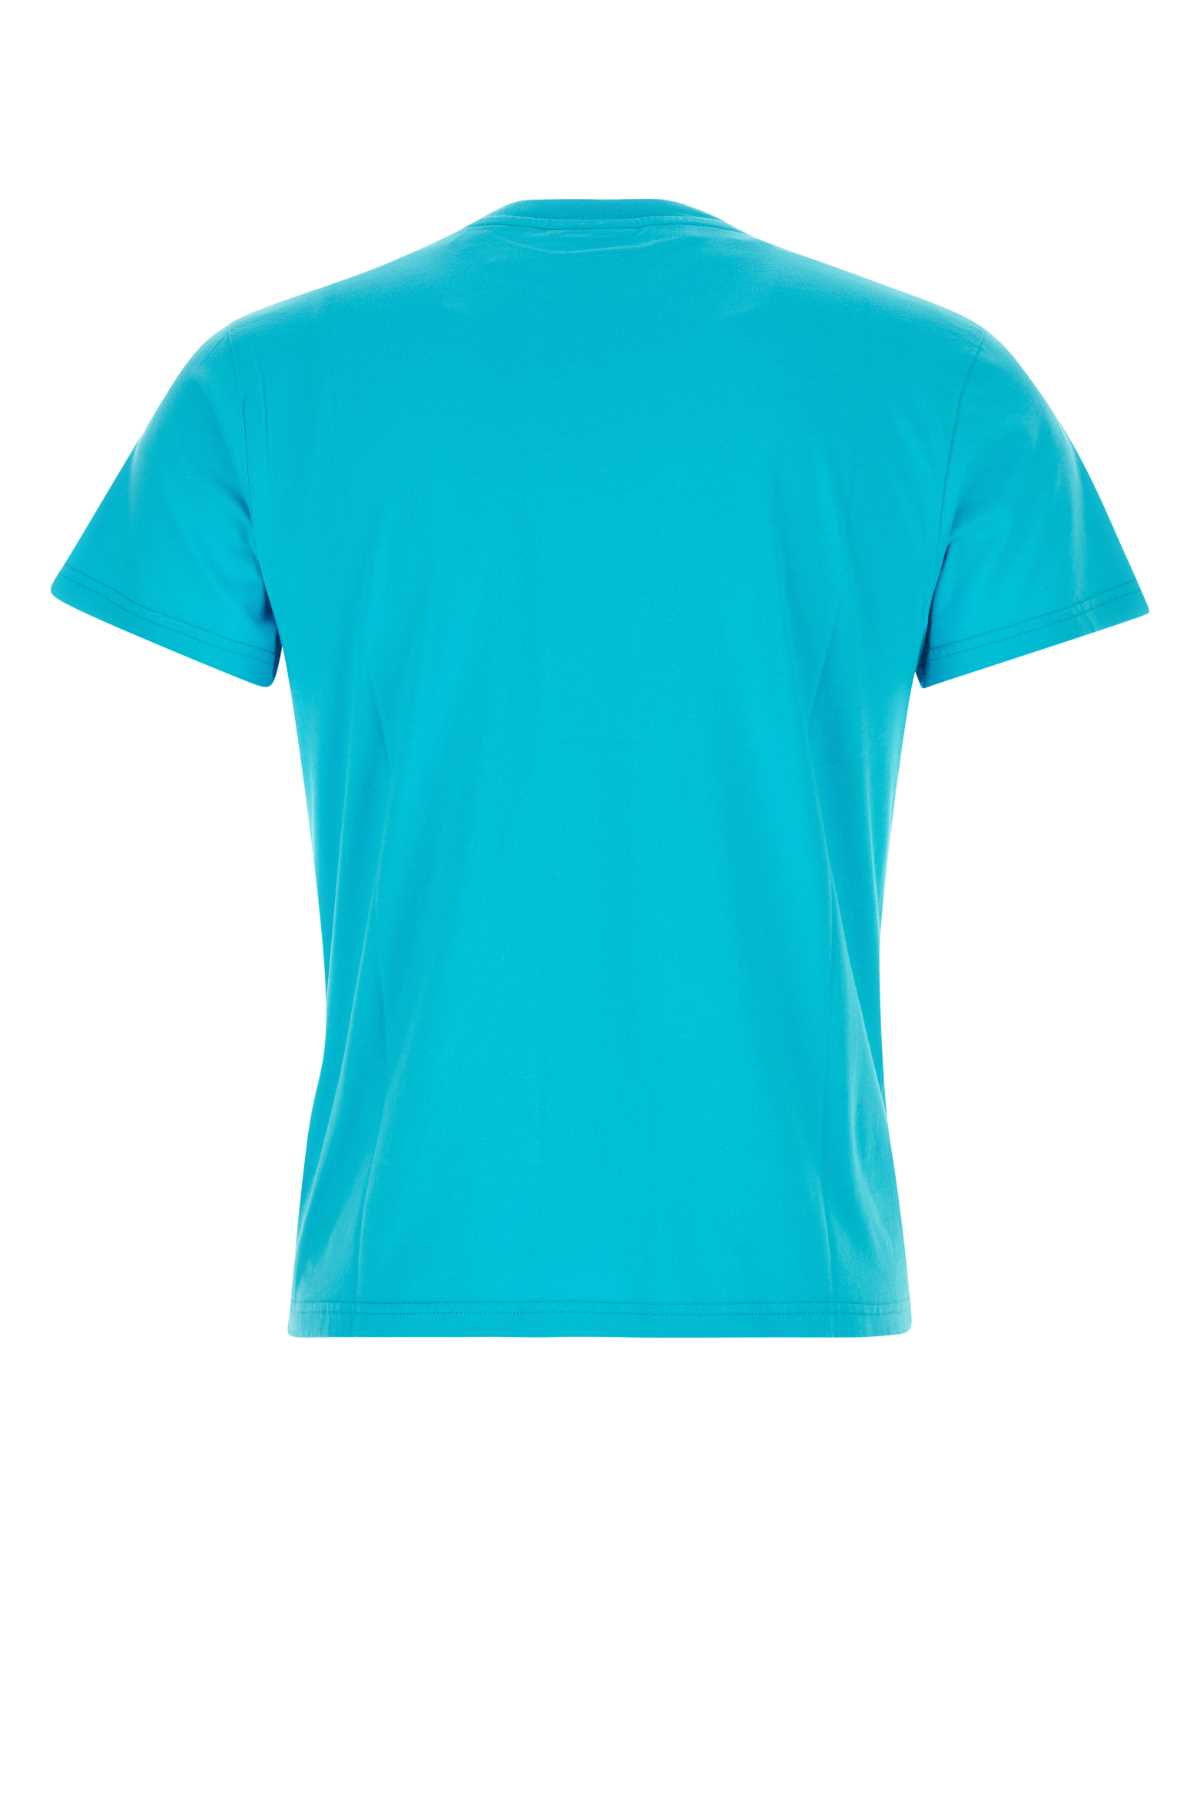 Botter Turquoise Cotton T-shirt In Botbluedolphin